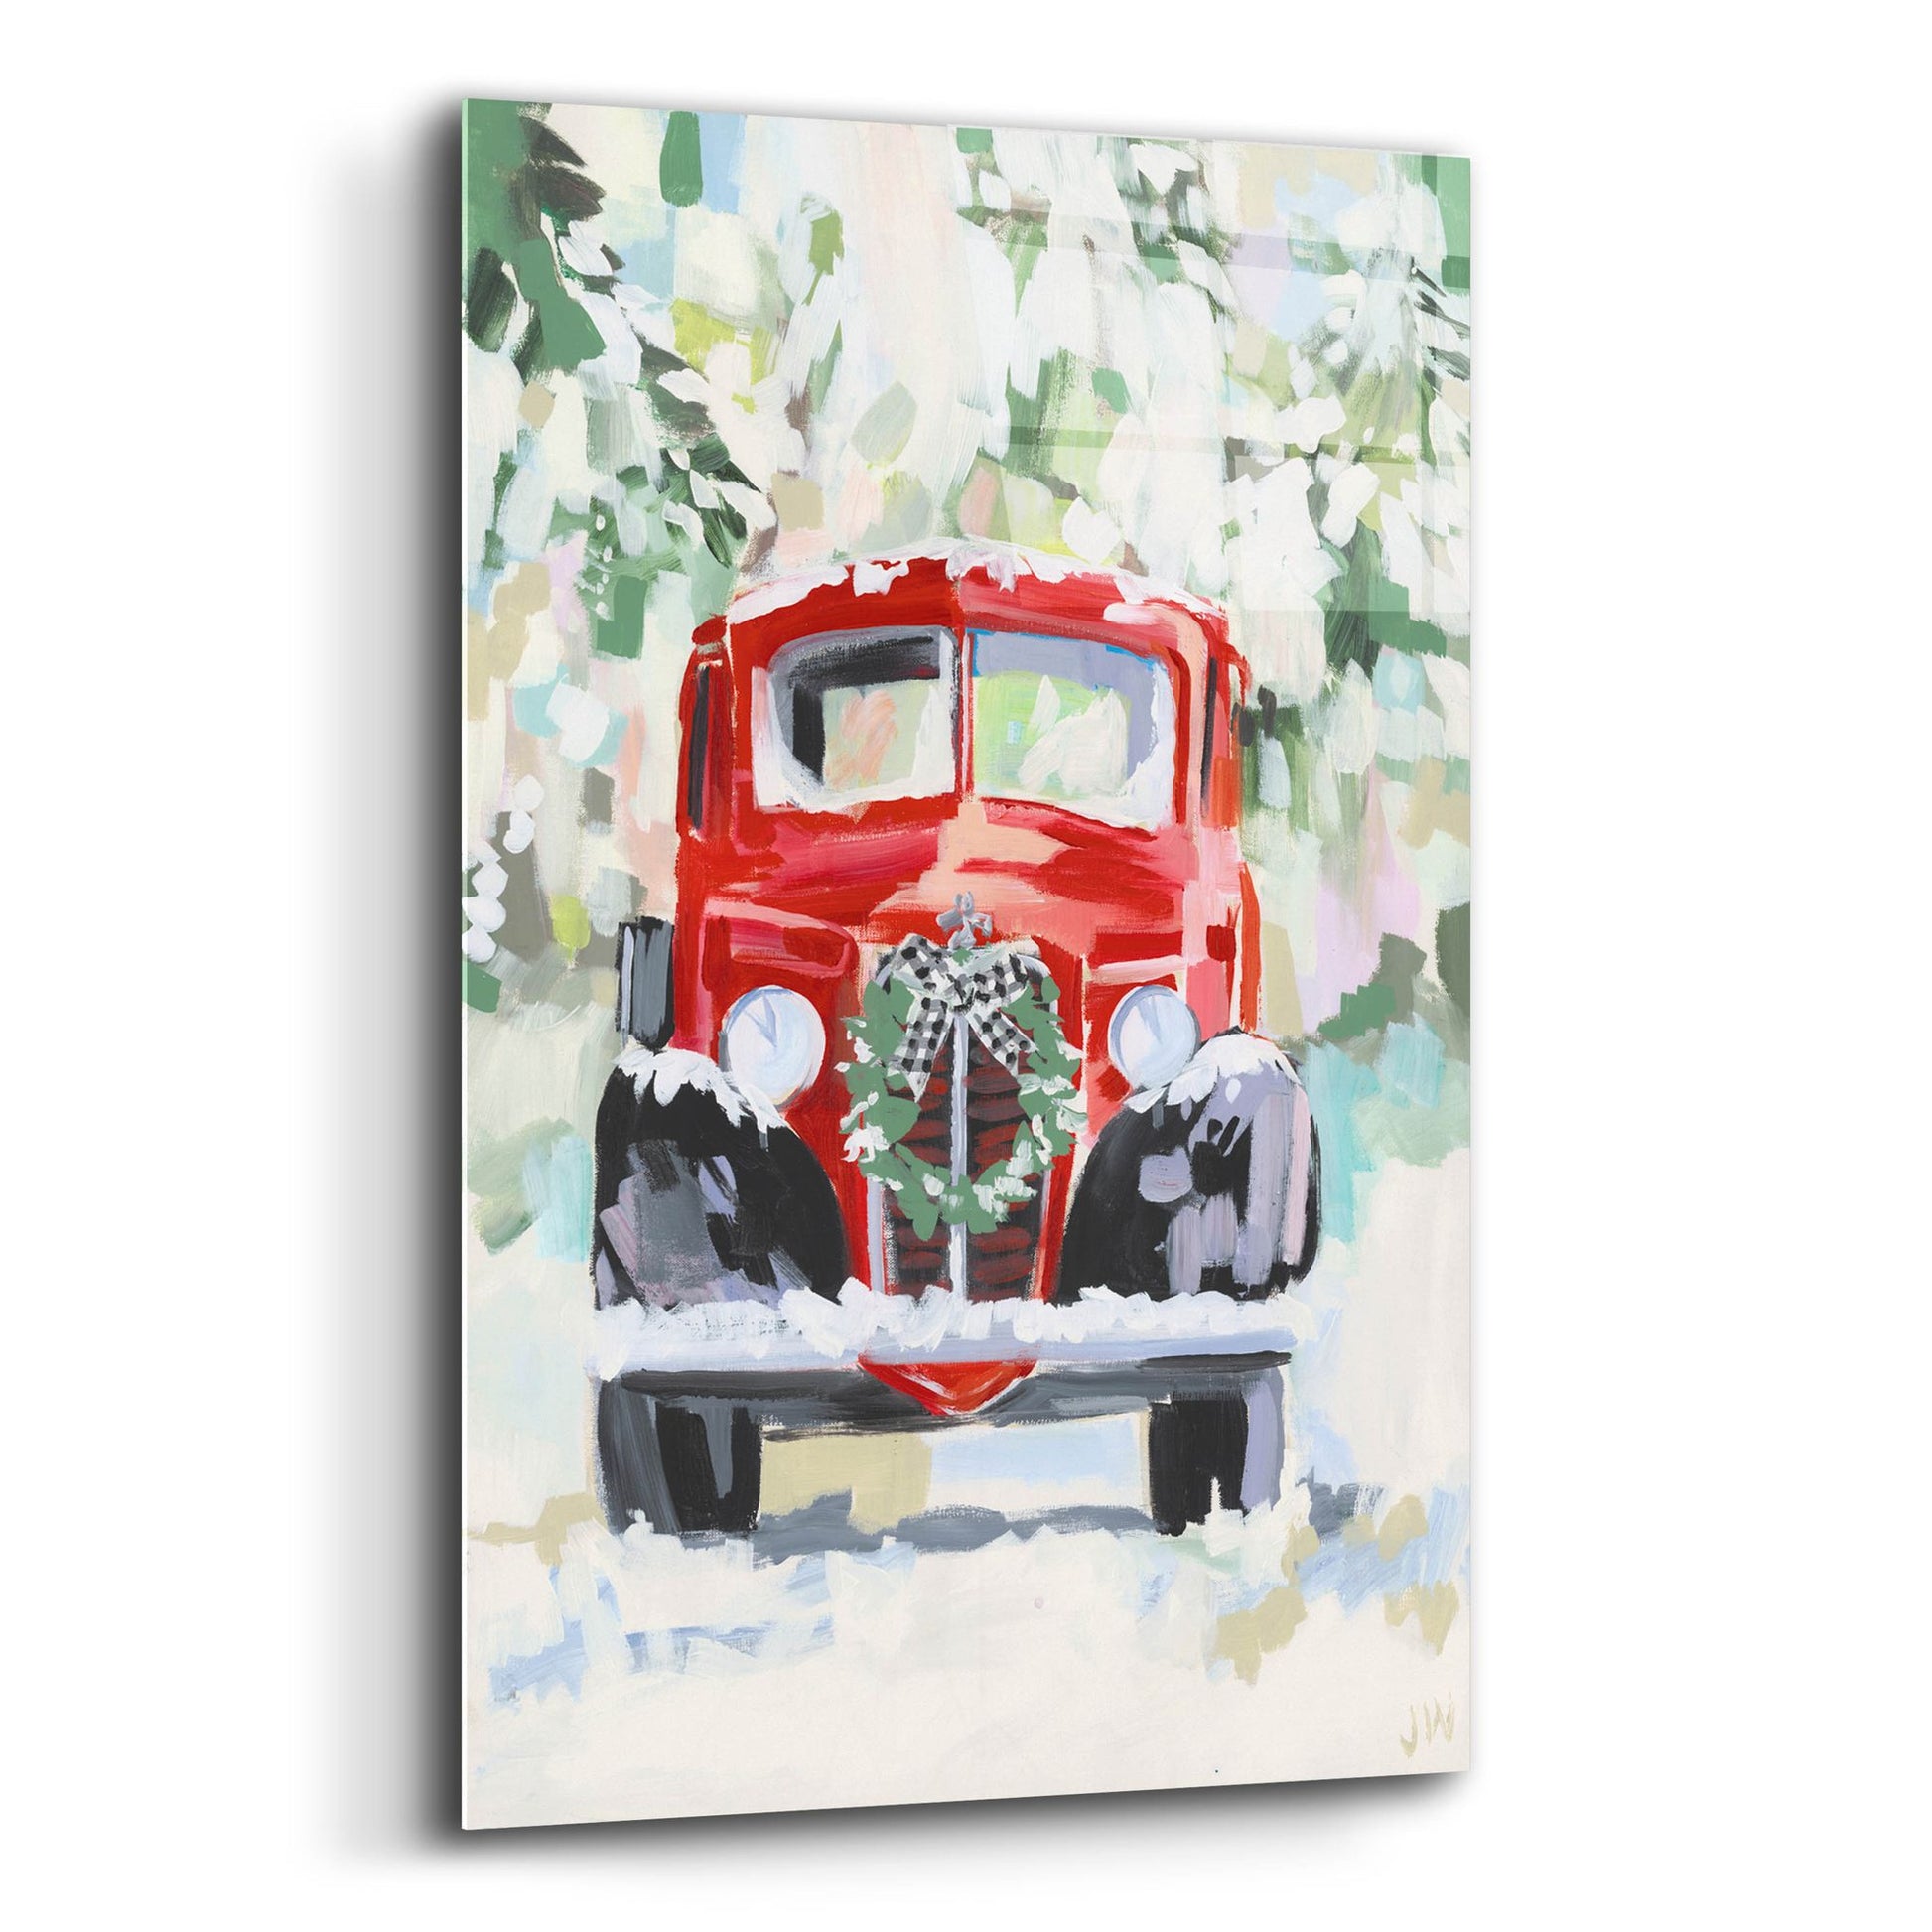 Epic Art 'Red Vintage Truck with Wreath' by Jenny Westenhofer, Acrylic Glass Wall Art,12x16